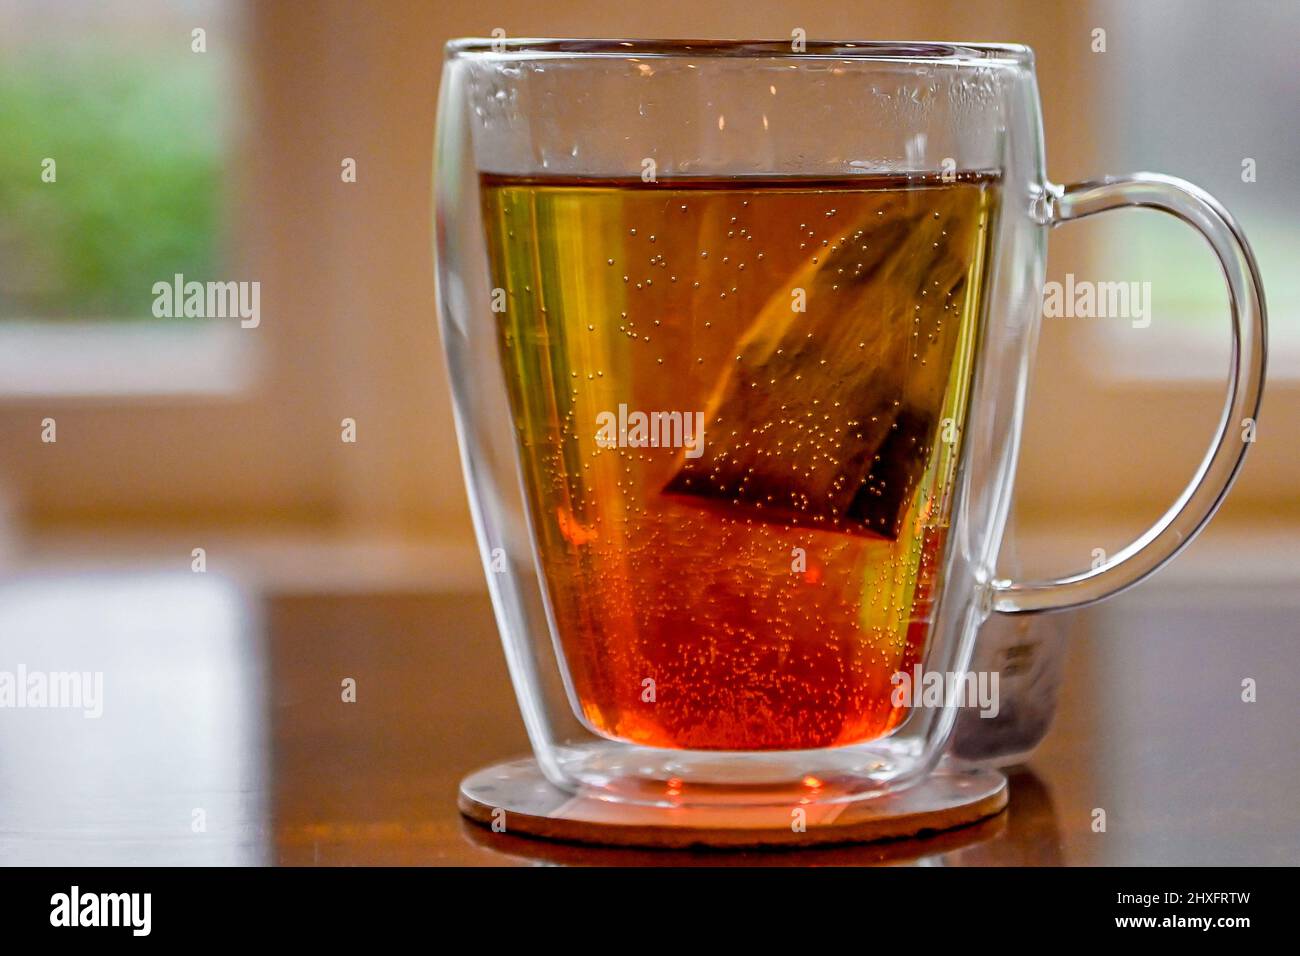 Brewing tea bag in water - caffeine drink in double glass walled tea cup - close up of a partially brewed teabag in a teacup of hot water Stock Photo